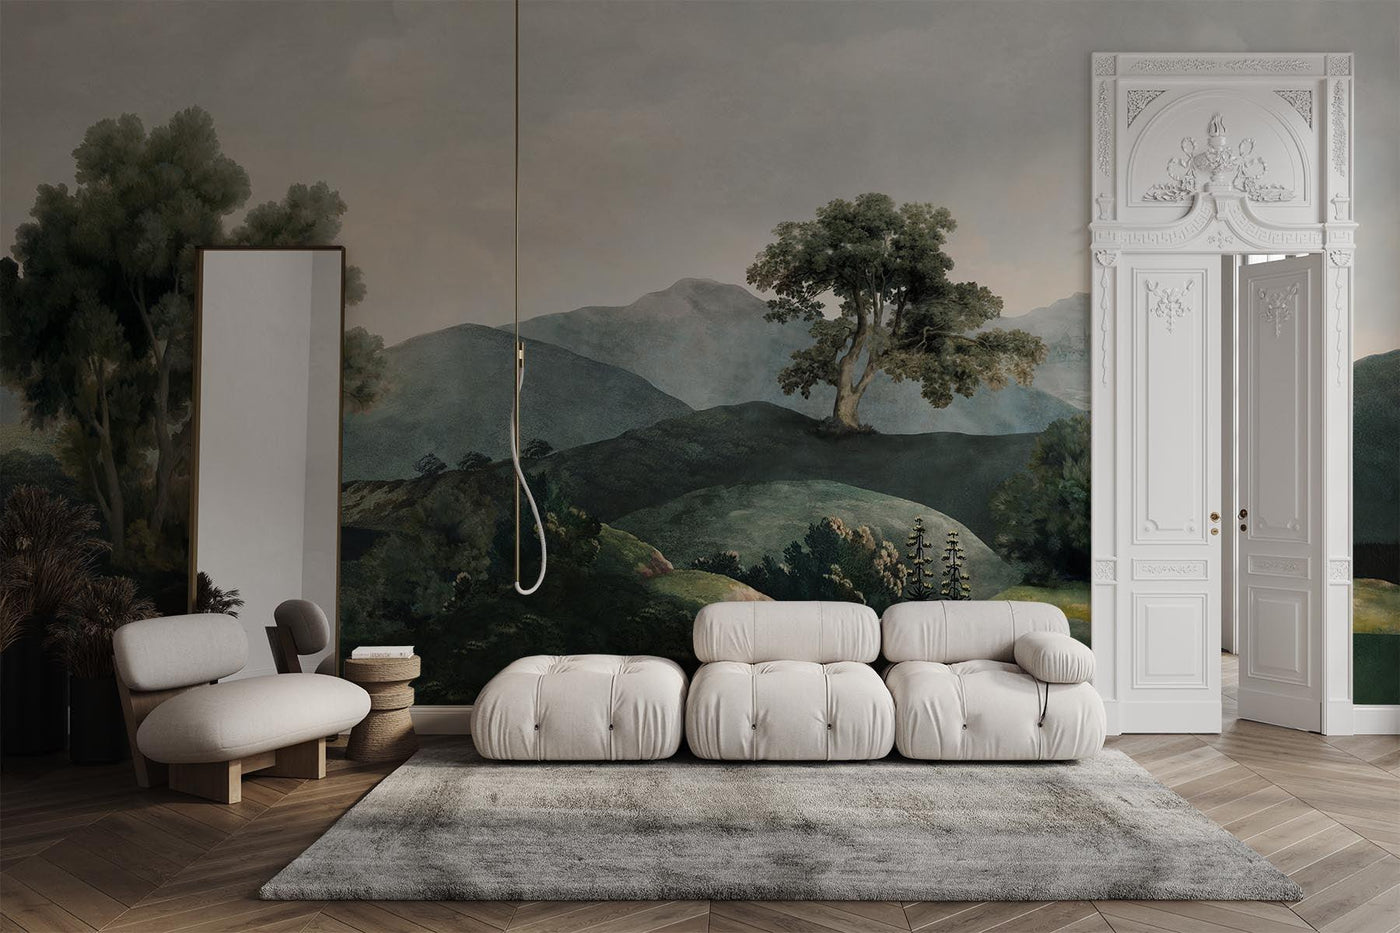 Giant Wall Murals to Match Any Home's Decor | Society6